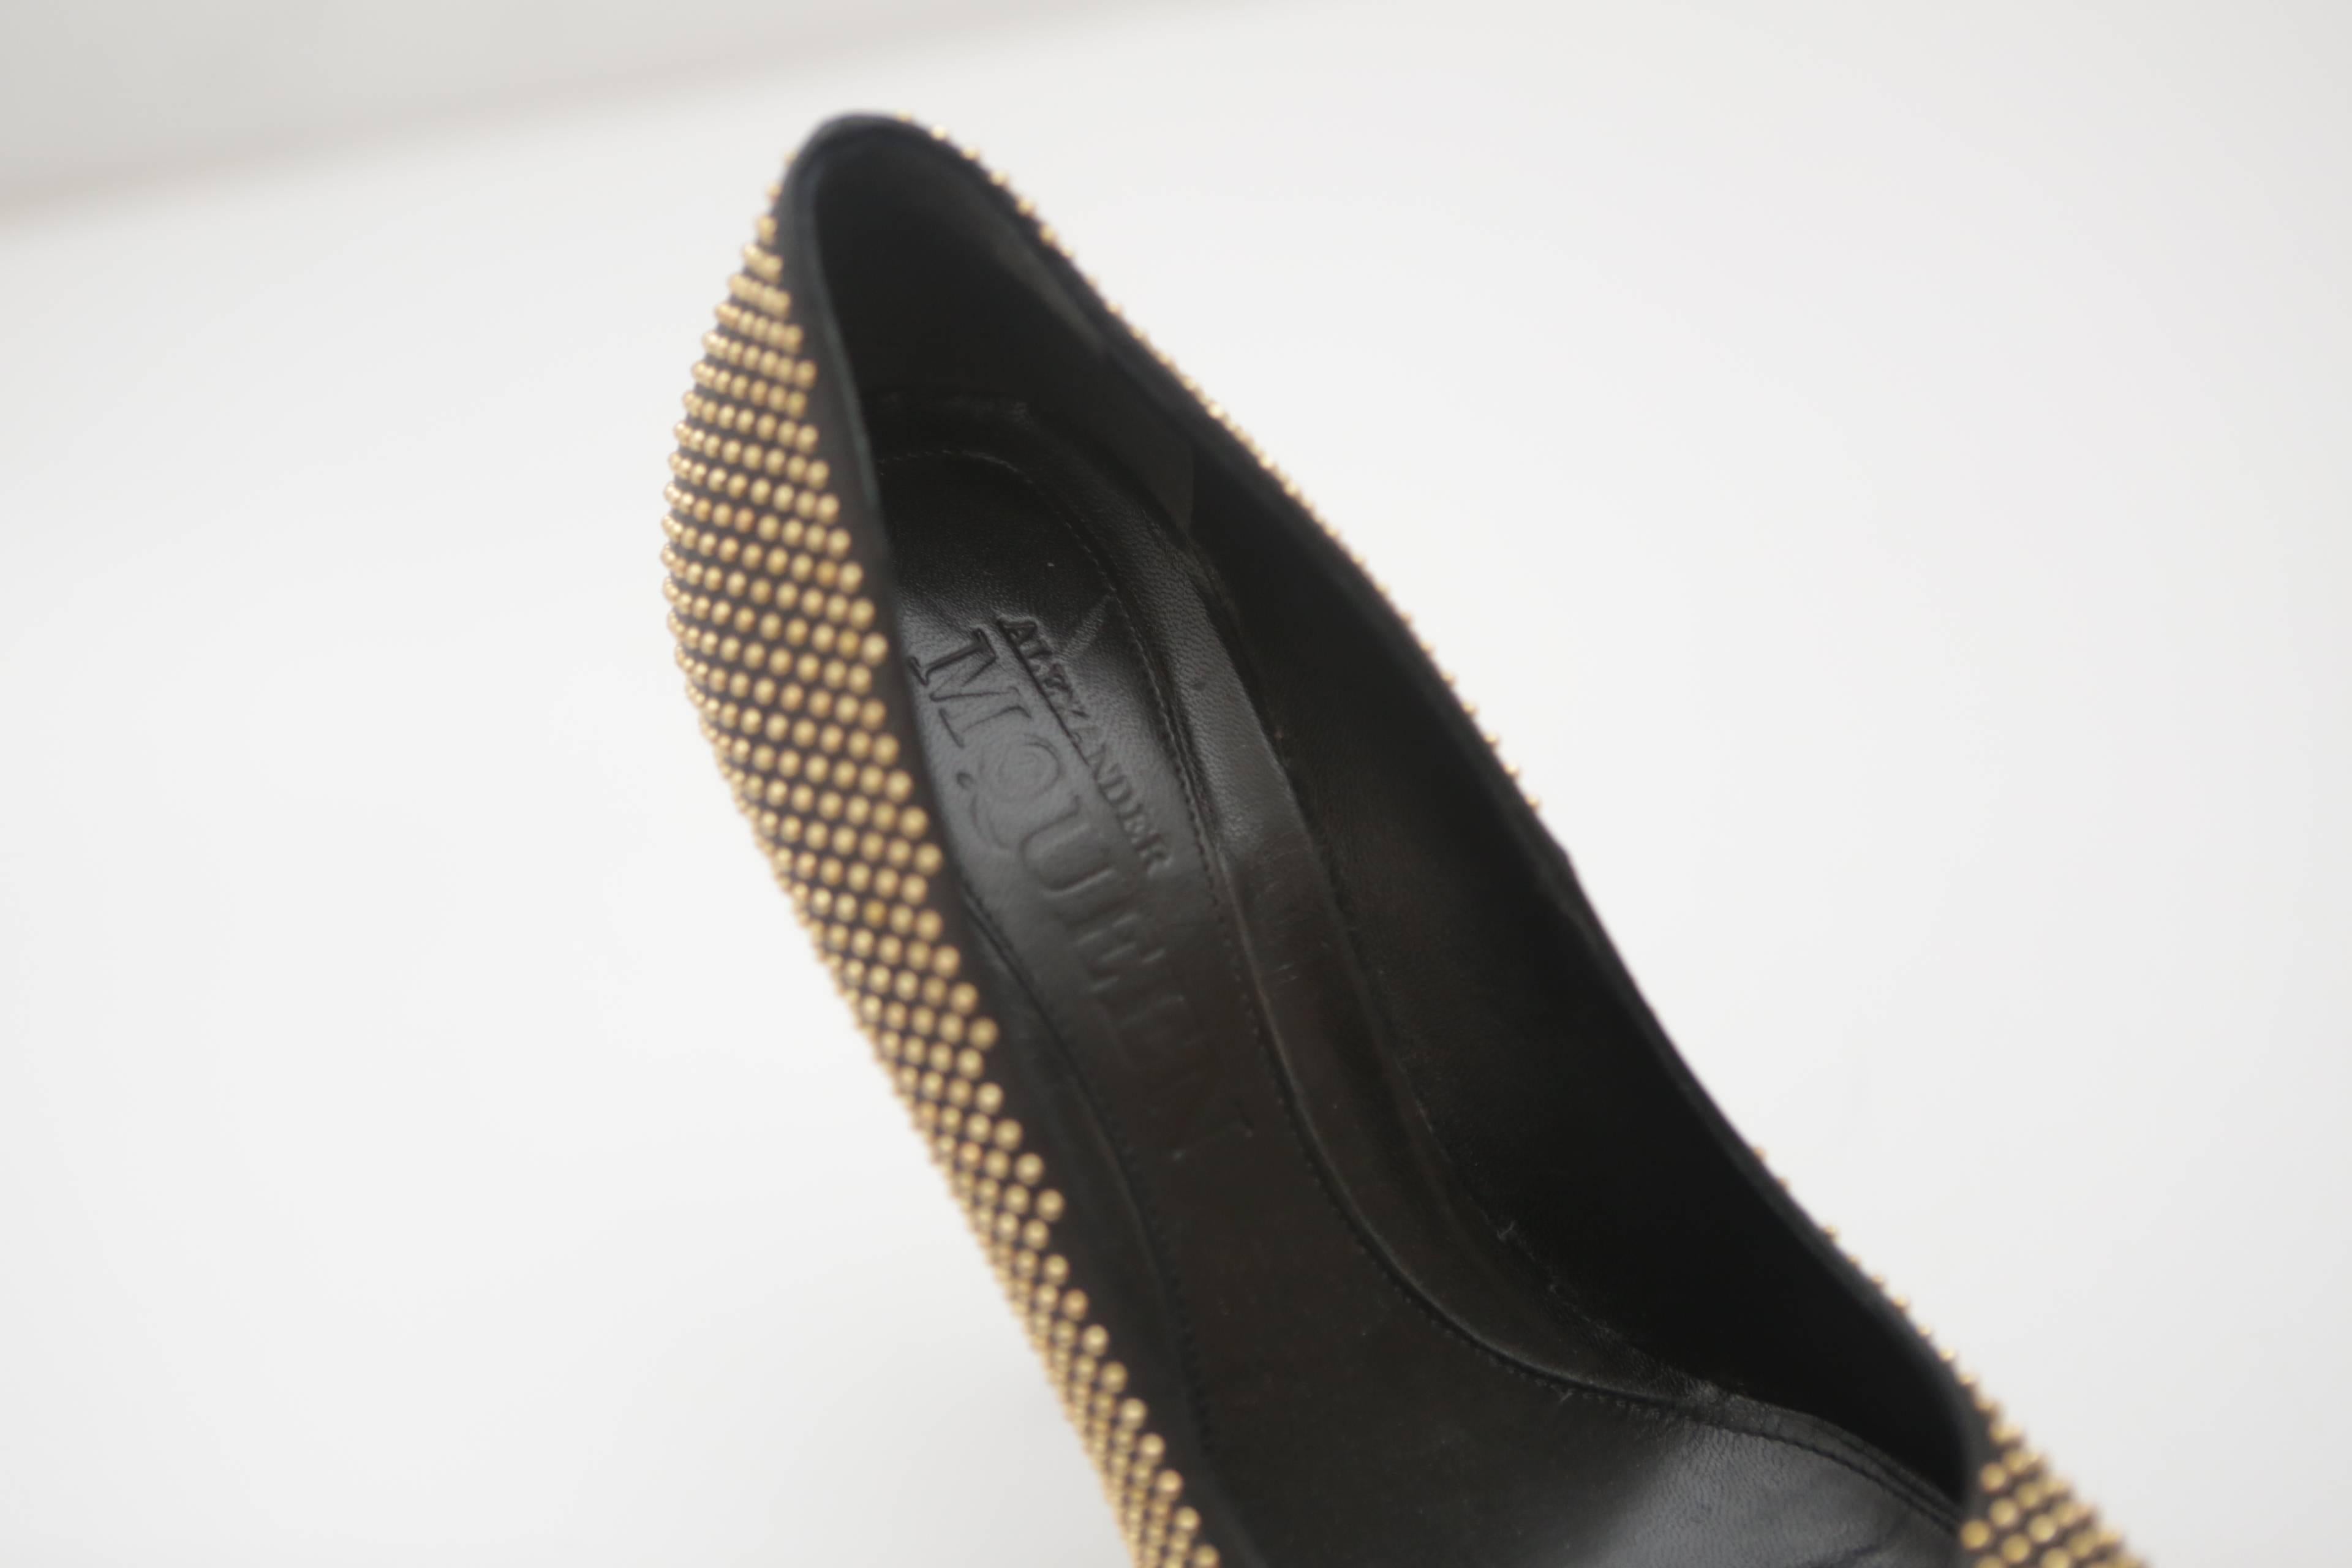 Alexander McQueen gold-studded almond toe pumps. Leather upper with gold-metal studs 5